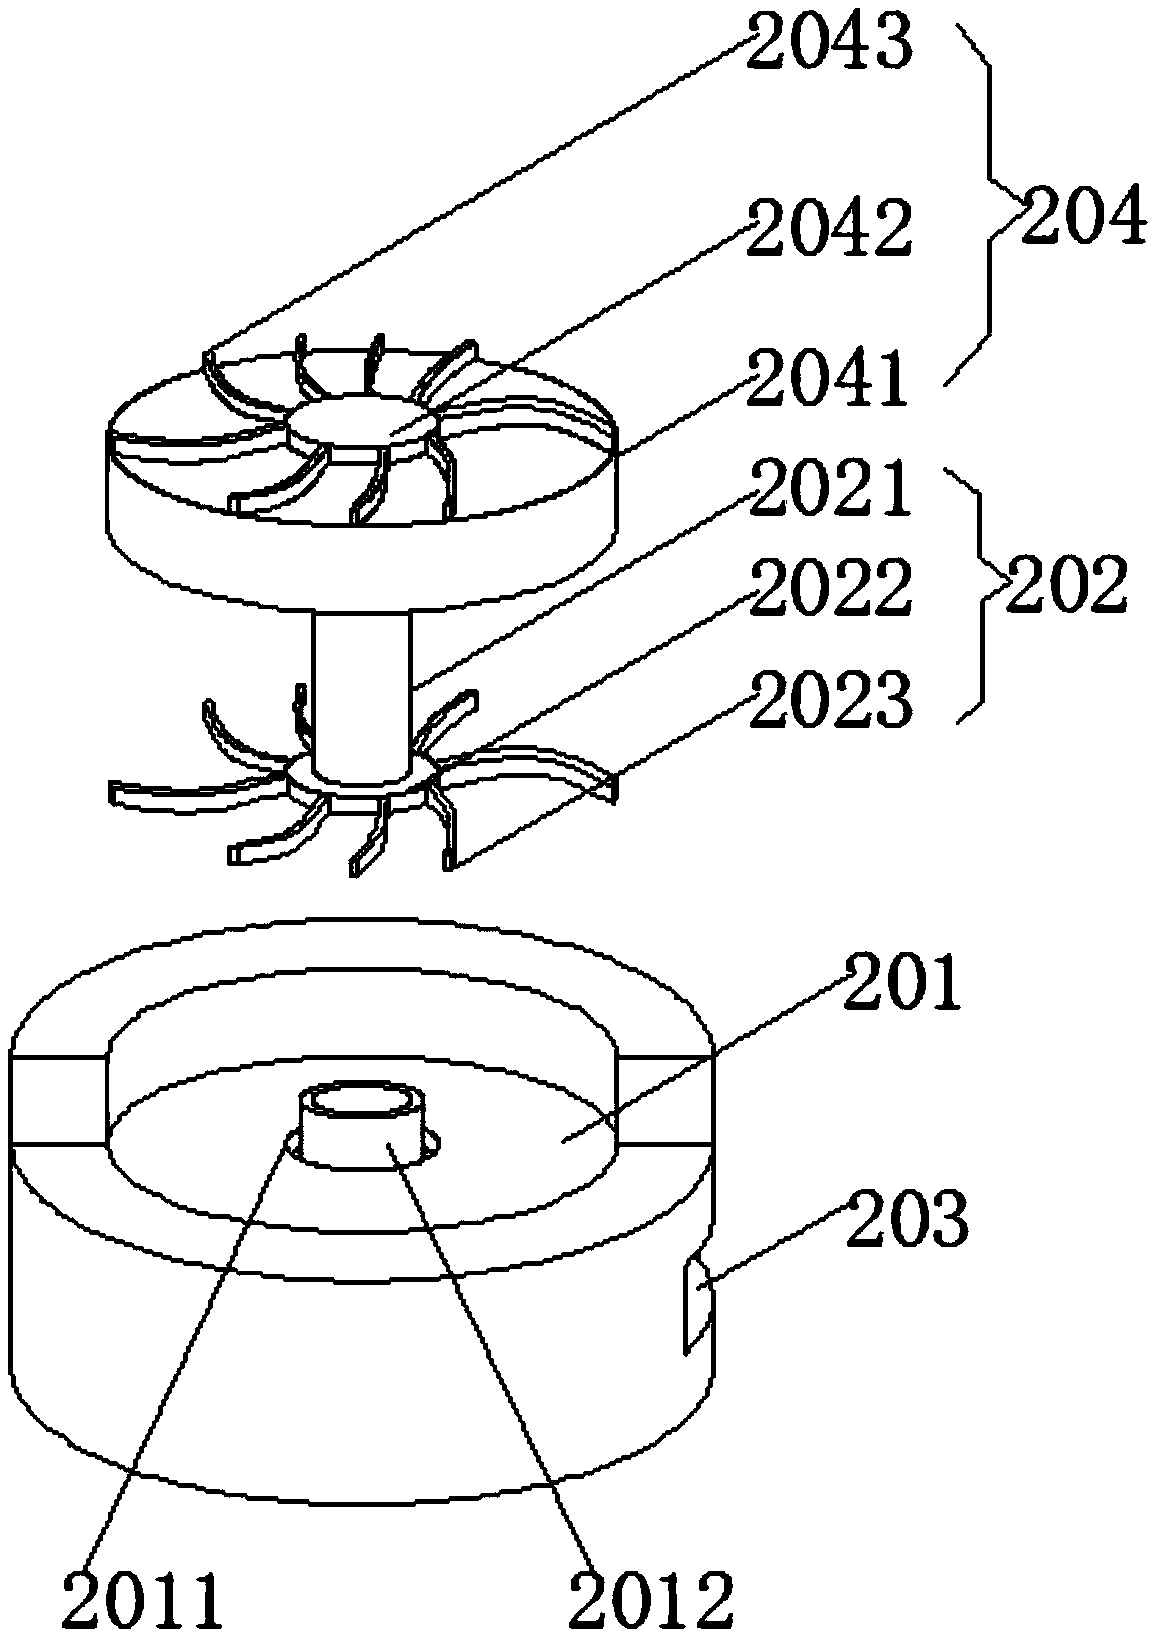 Auxiliary cooling cup based on theory of changing motion state of hot water